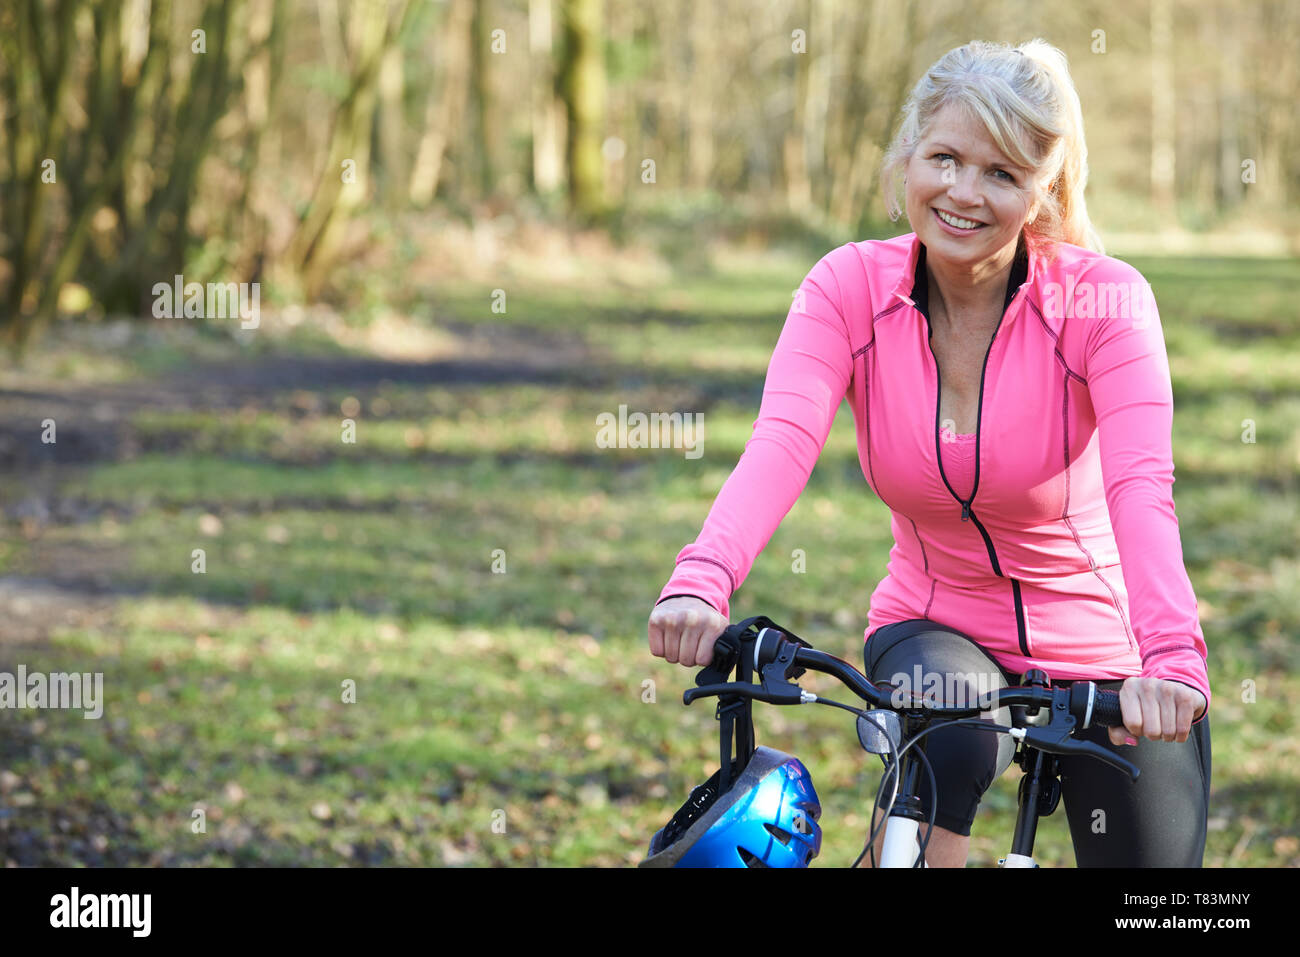 Portrait Of Mature Woman On Cycle Ride In Countryside Stock Photo